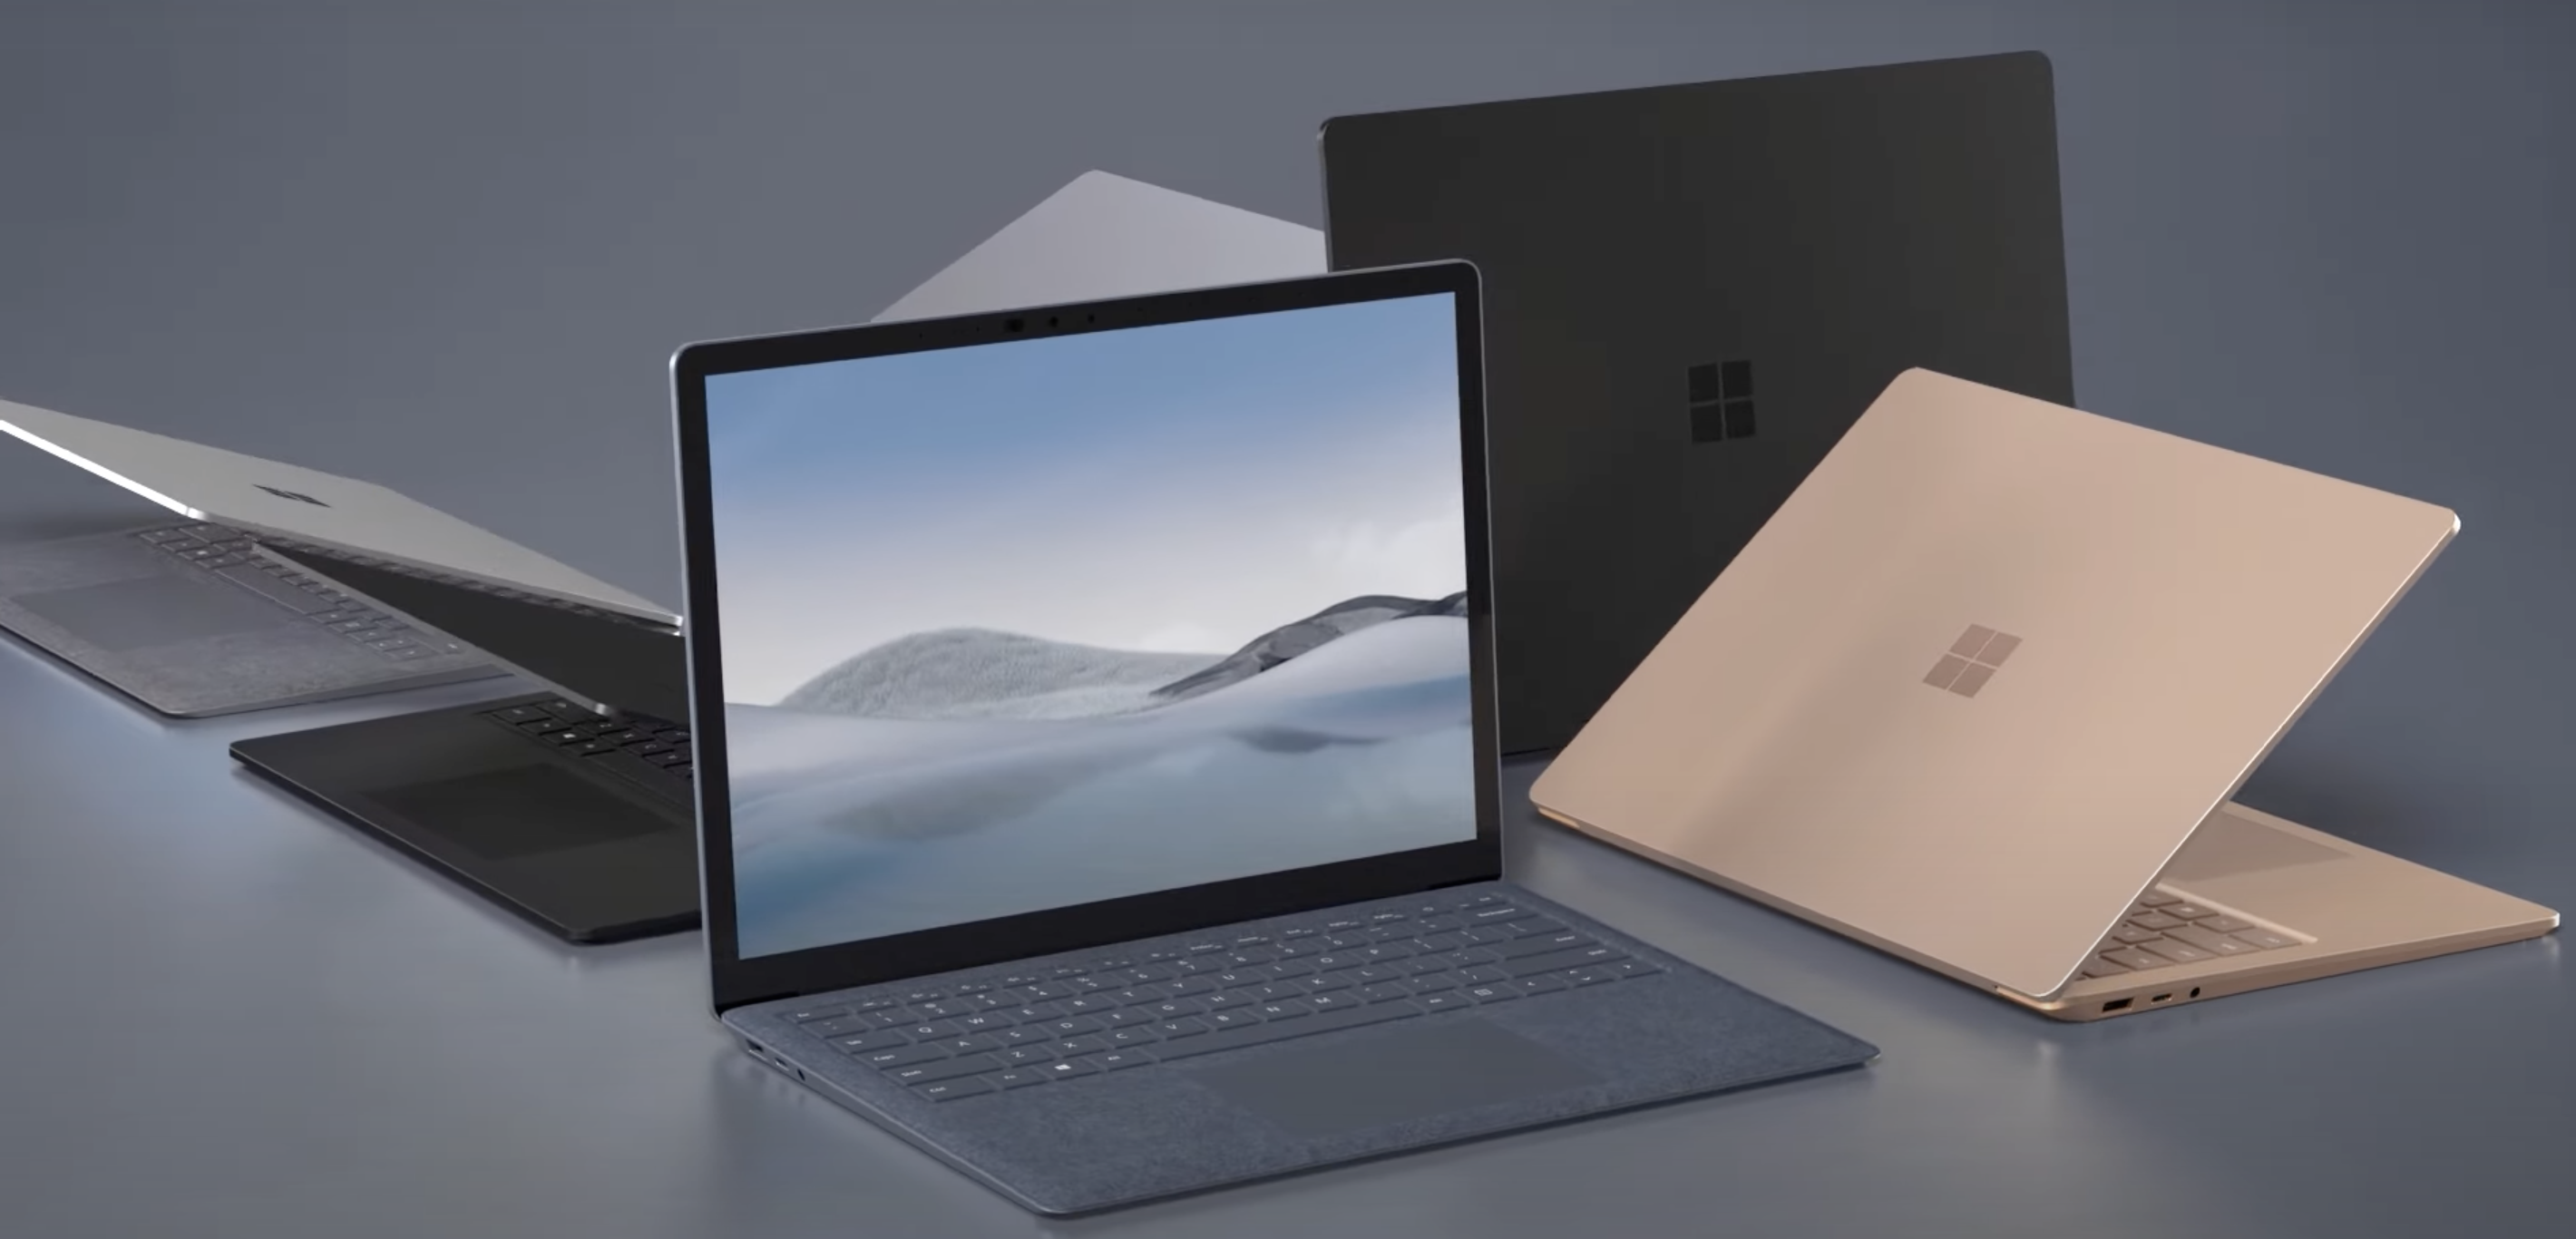 Microsoft Surface Laptop Launched: All You Need To Know